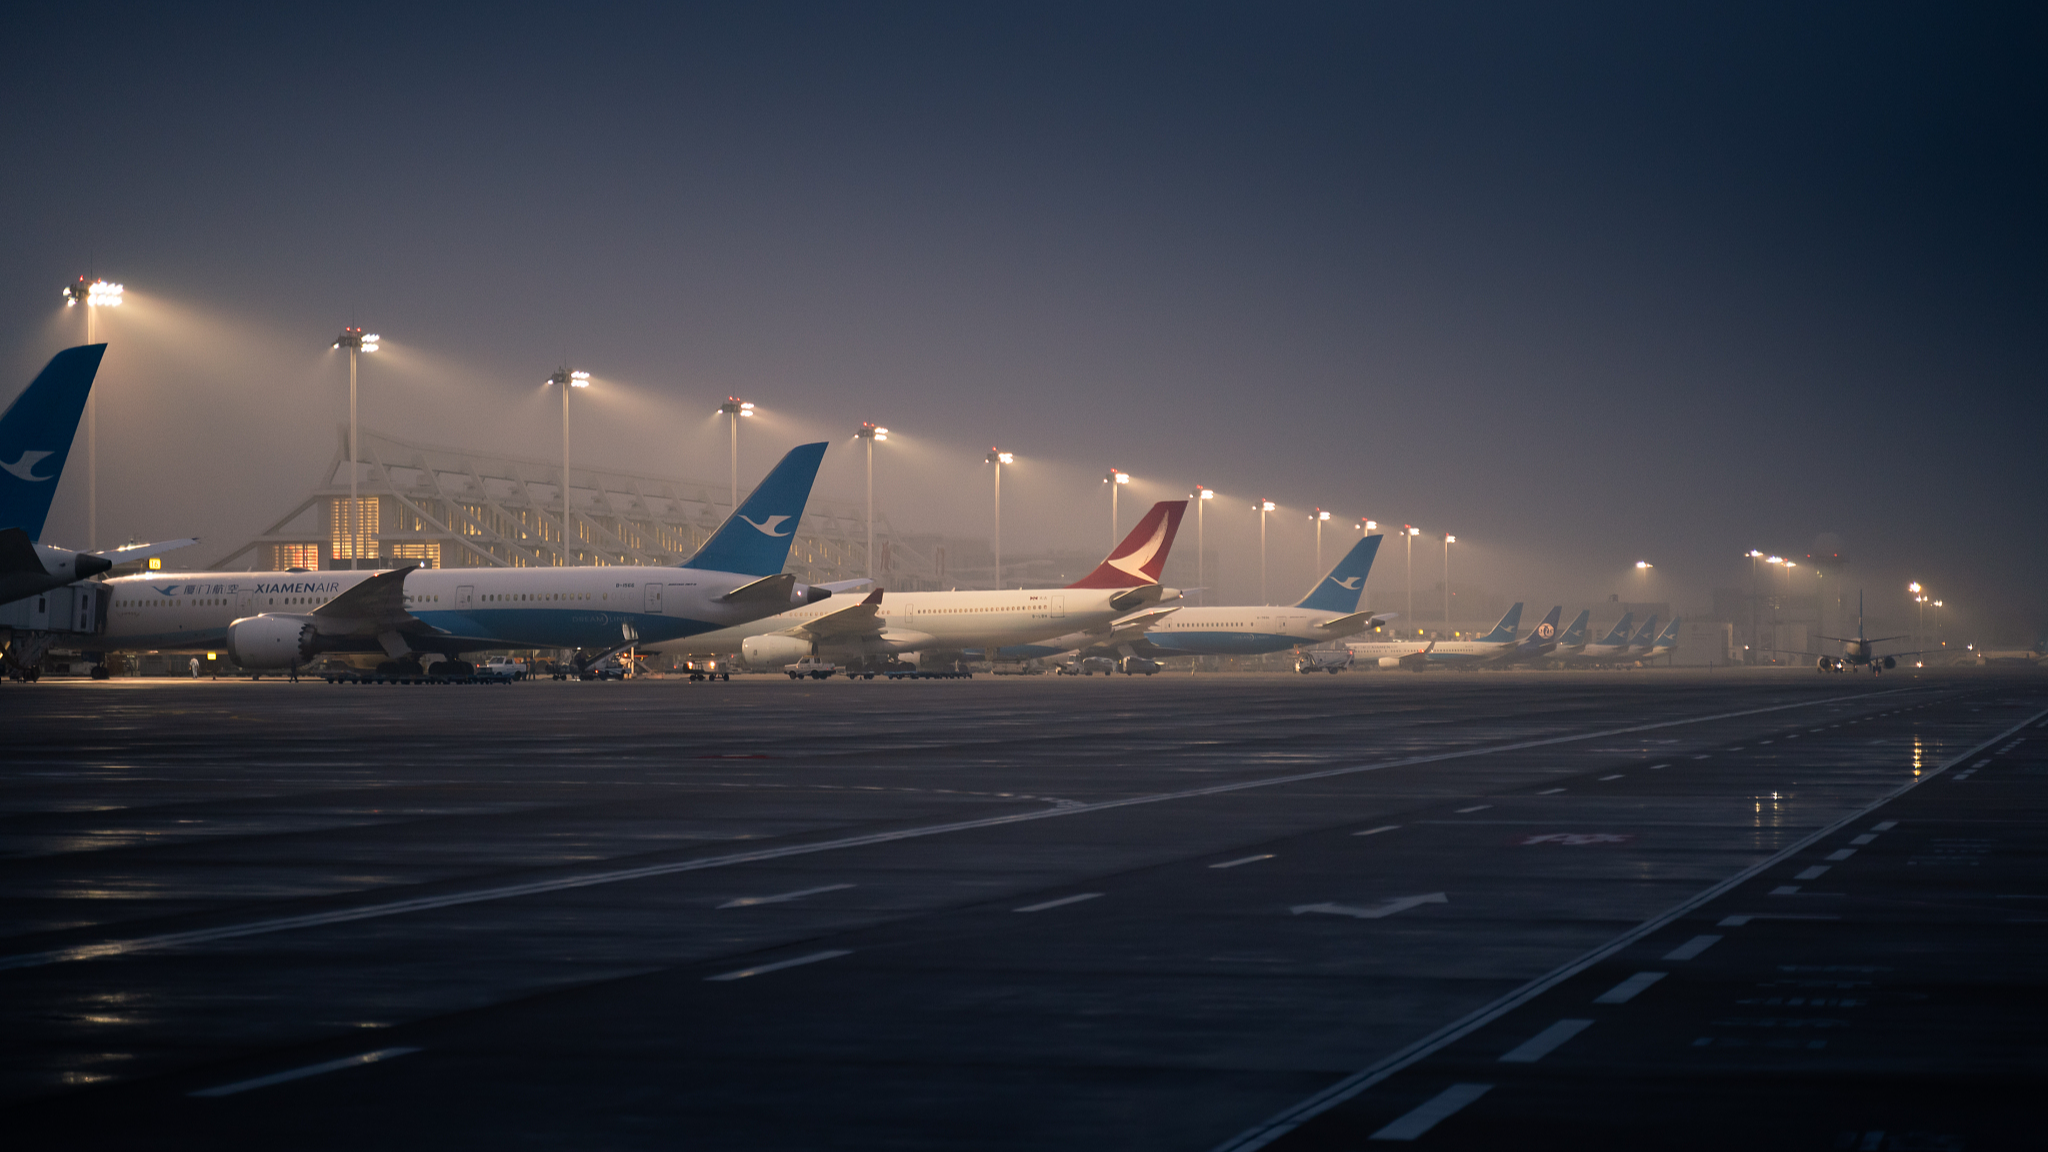 Planes are ready to take off at dawn at Xiamen Gaoqi International Airport, December 25, 2019. /CFP